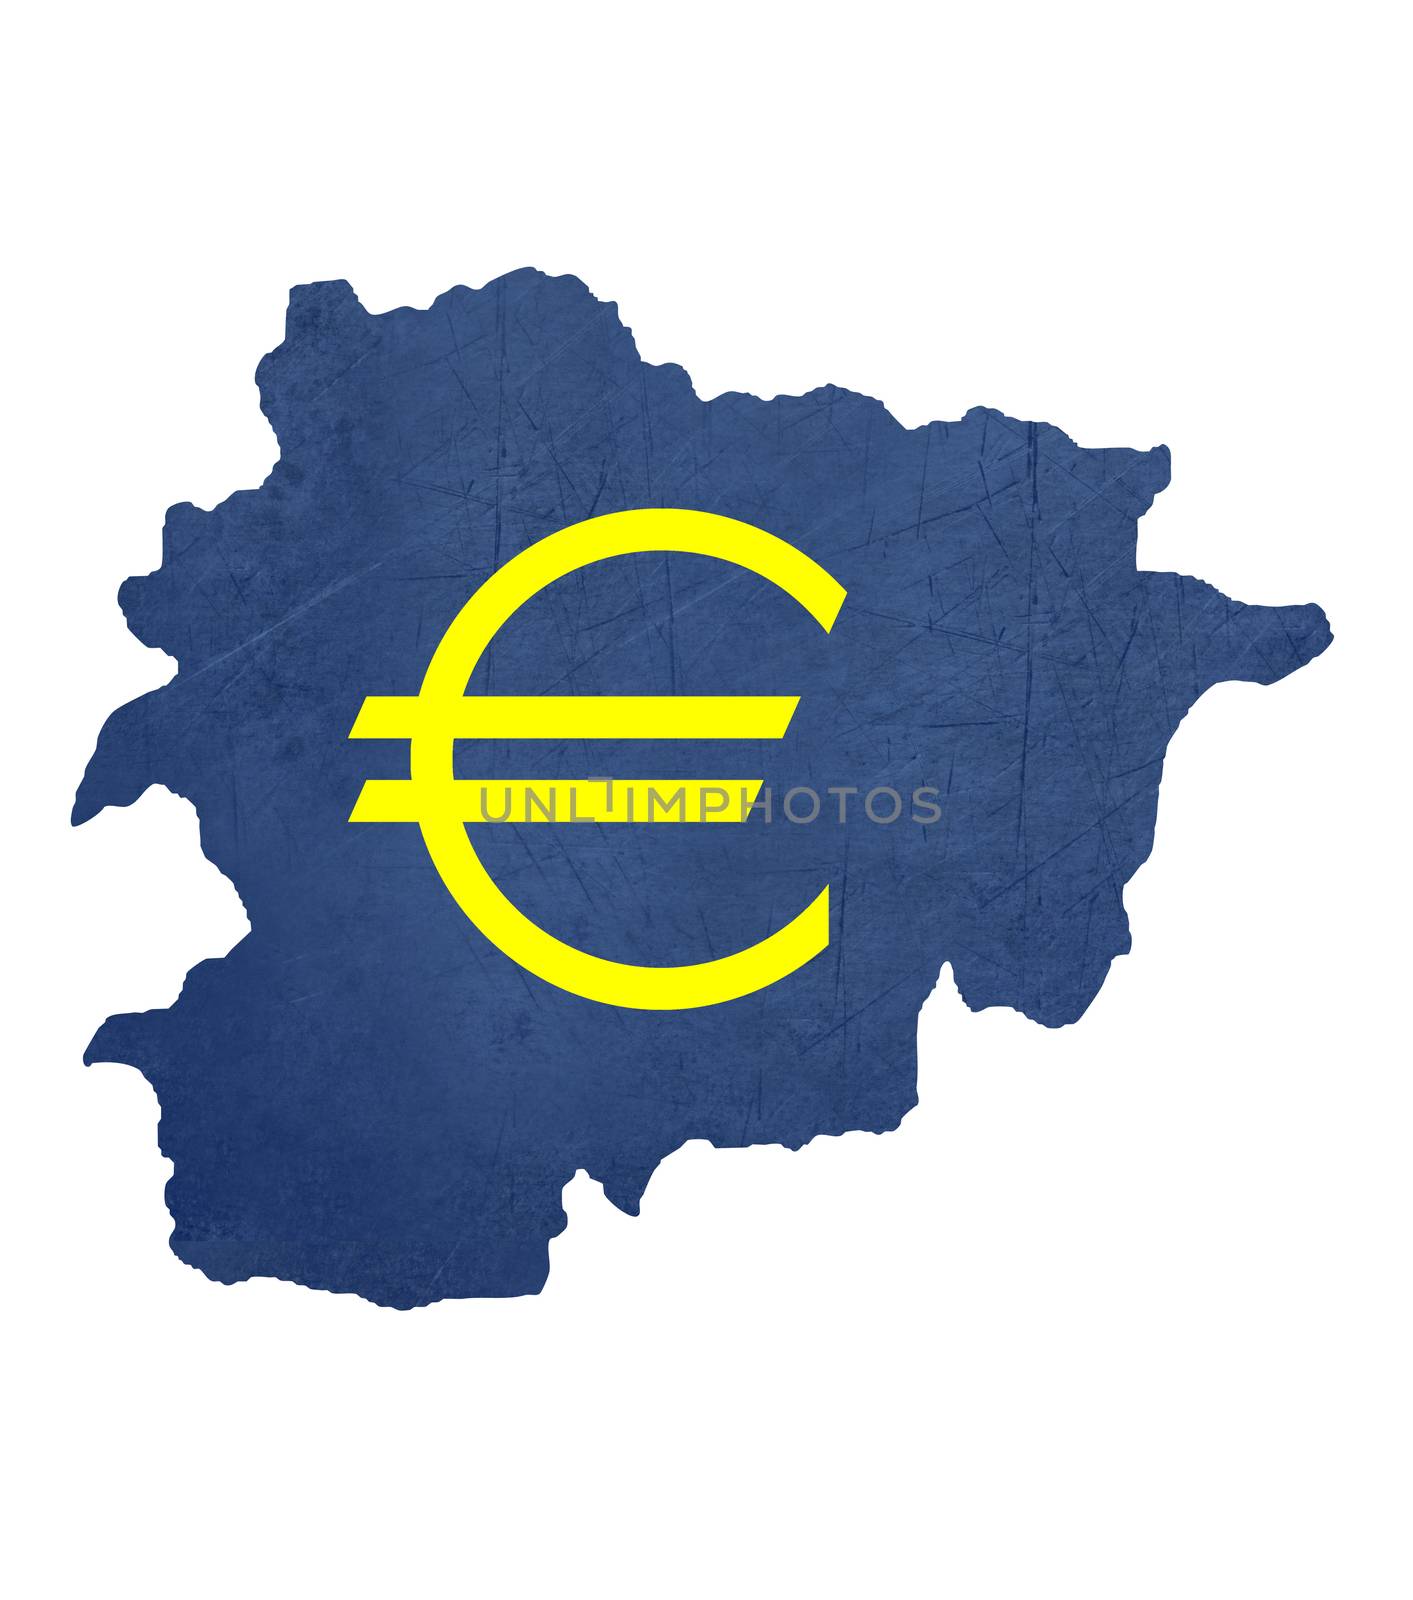 European currency symbol on map of Andorra isolated on white background.